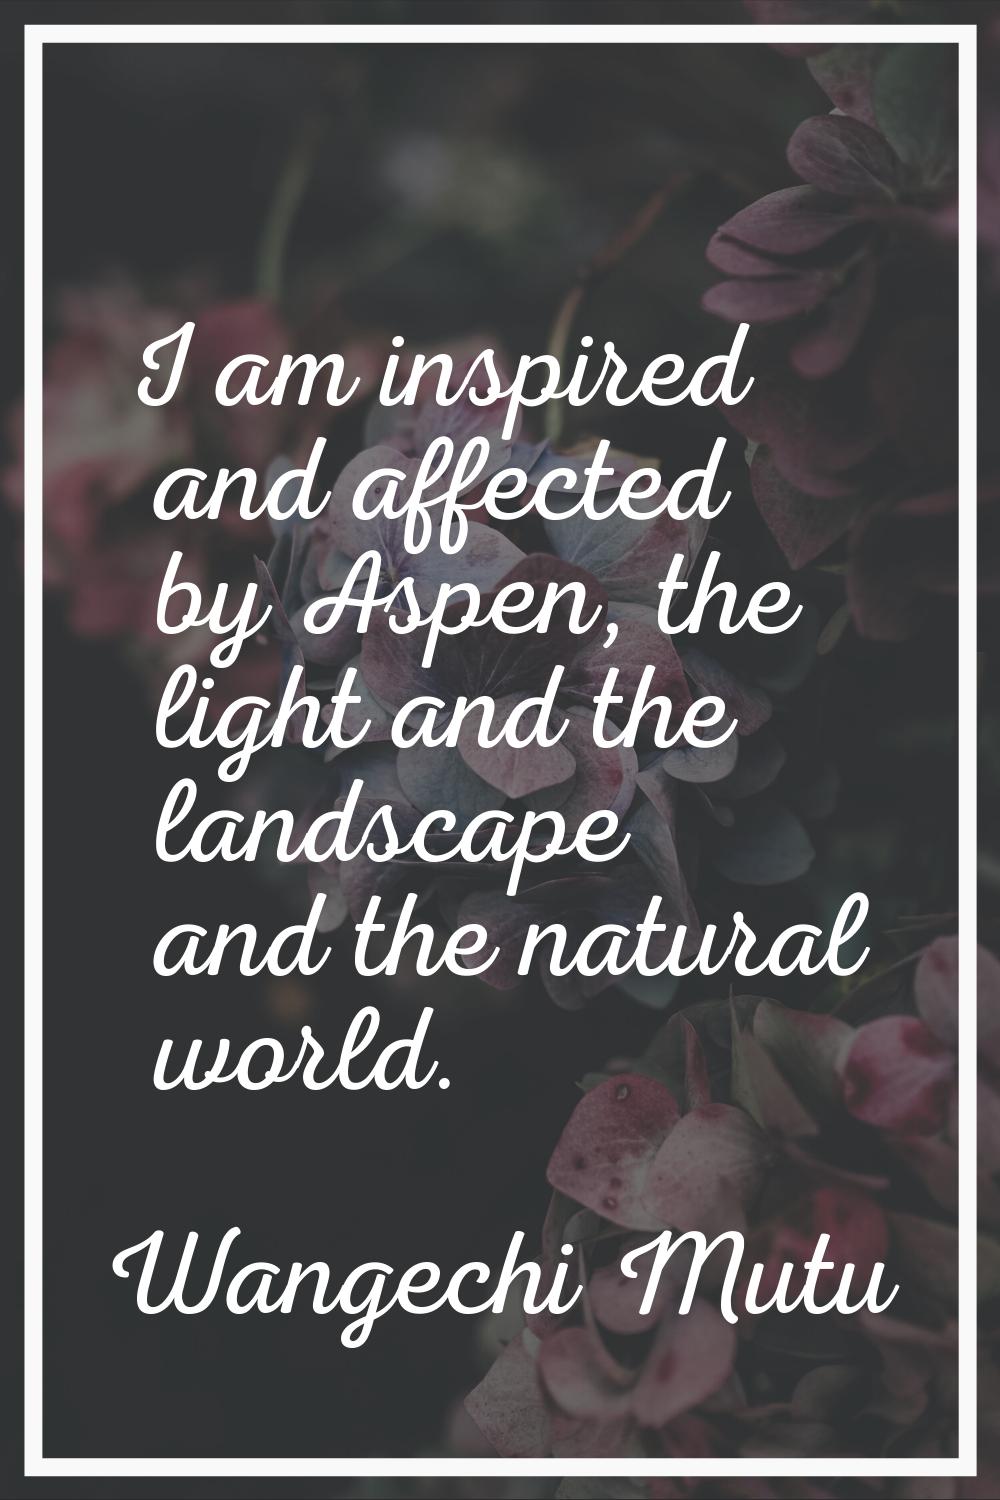 I am inspired and affected by Aspen, the light and the landscape and the natural world.